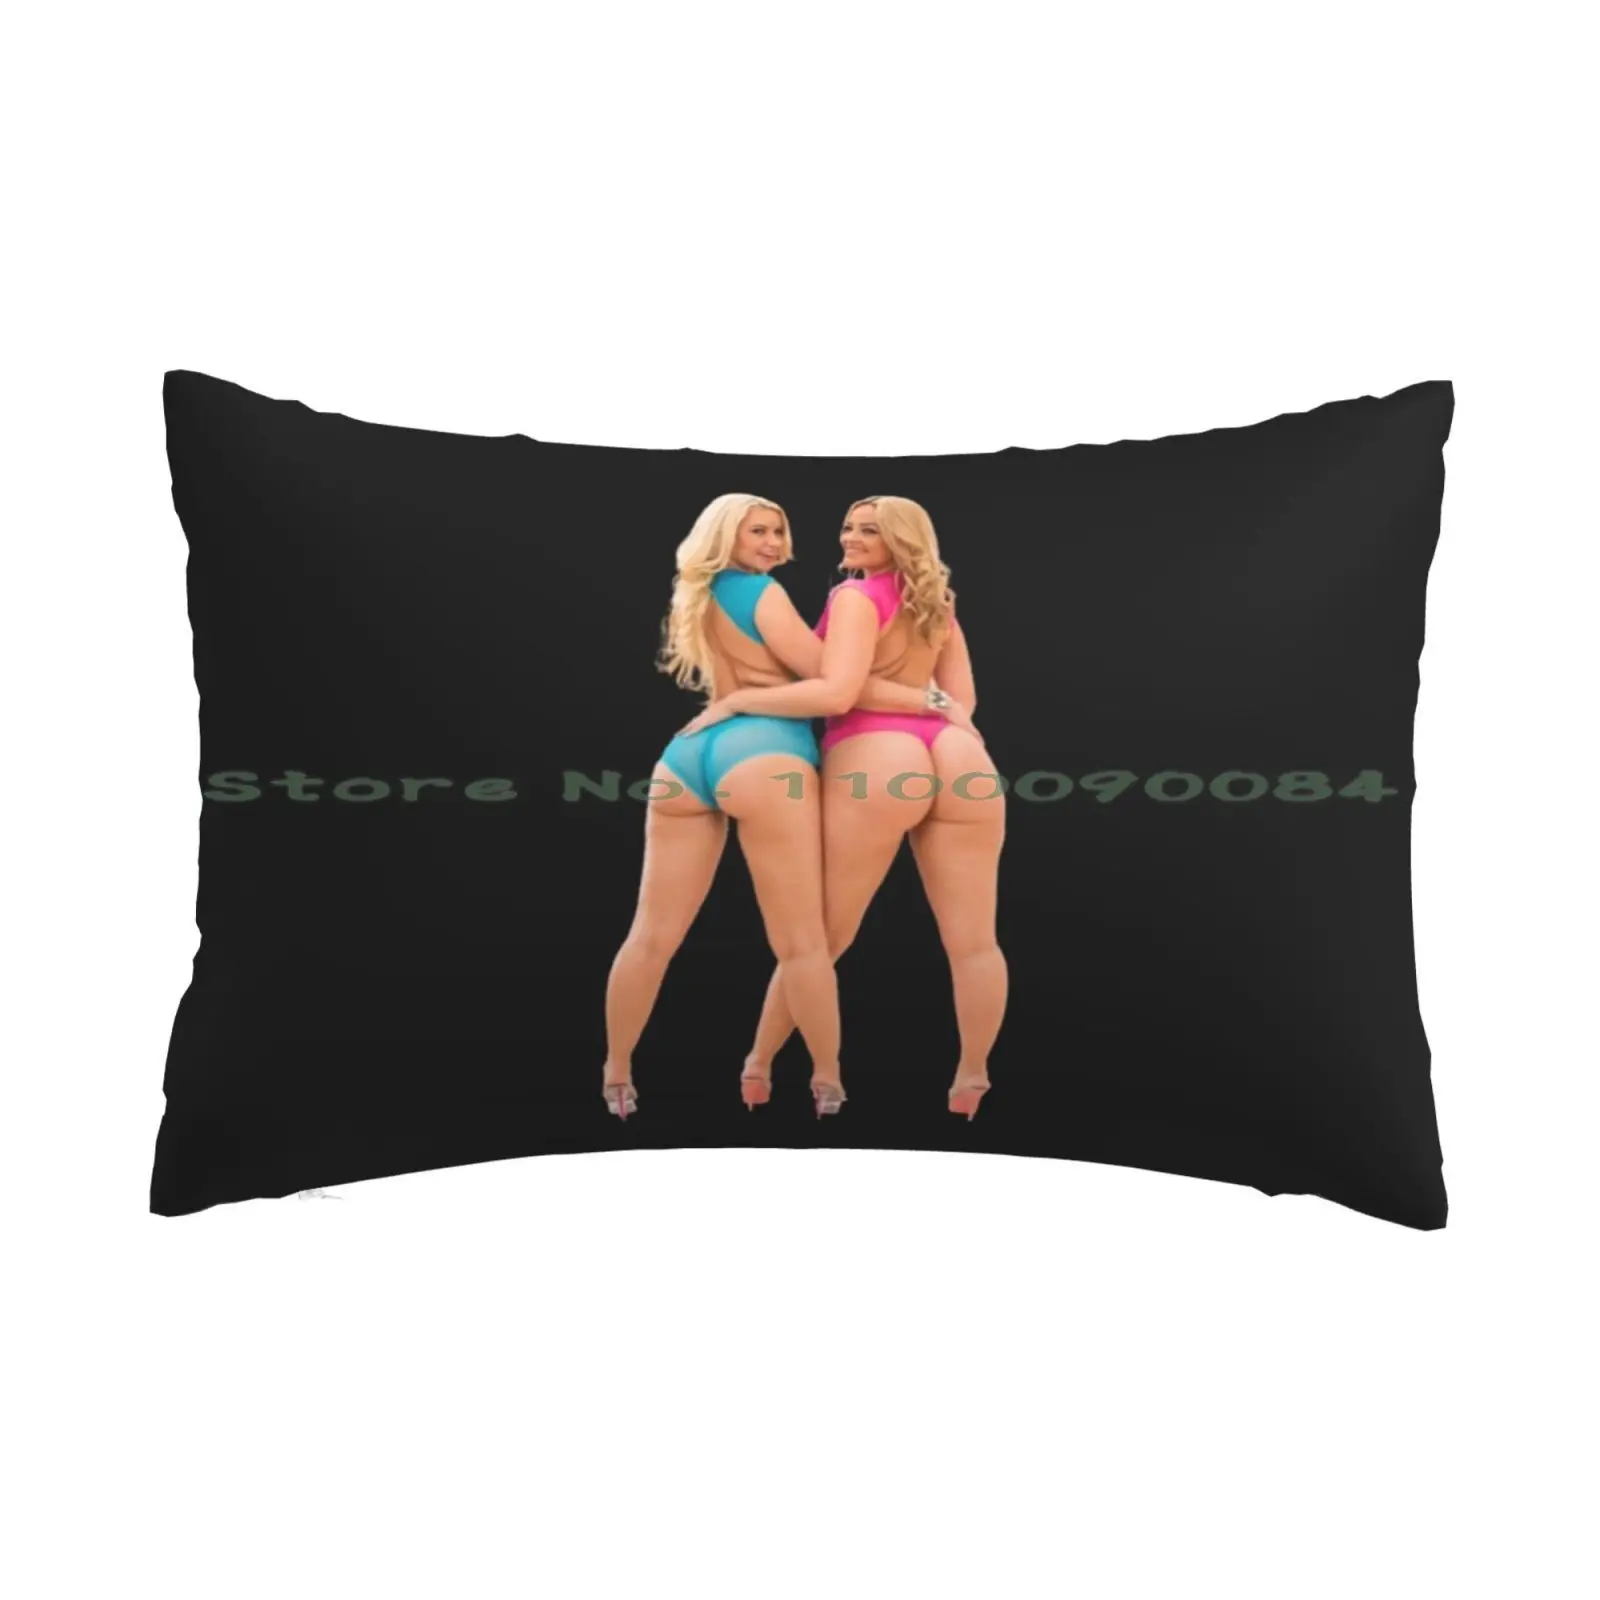 1600px x 1600px - Alexis Texas And Anikka Albrite Sexy Lesbian Pillow Case 20x30 50*75 Sofa  Bedroom Almost Birdhouse Deathwish Tj Rojer Skate Or - Pillow Case -  AliExpress